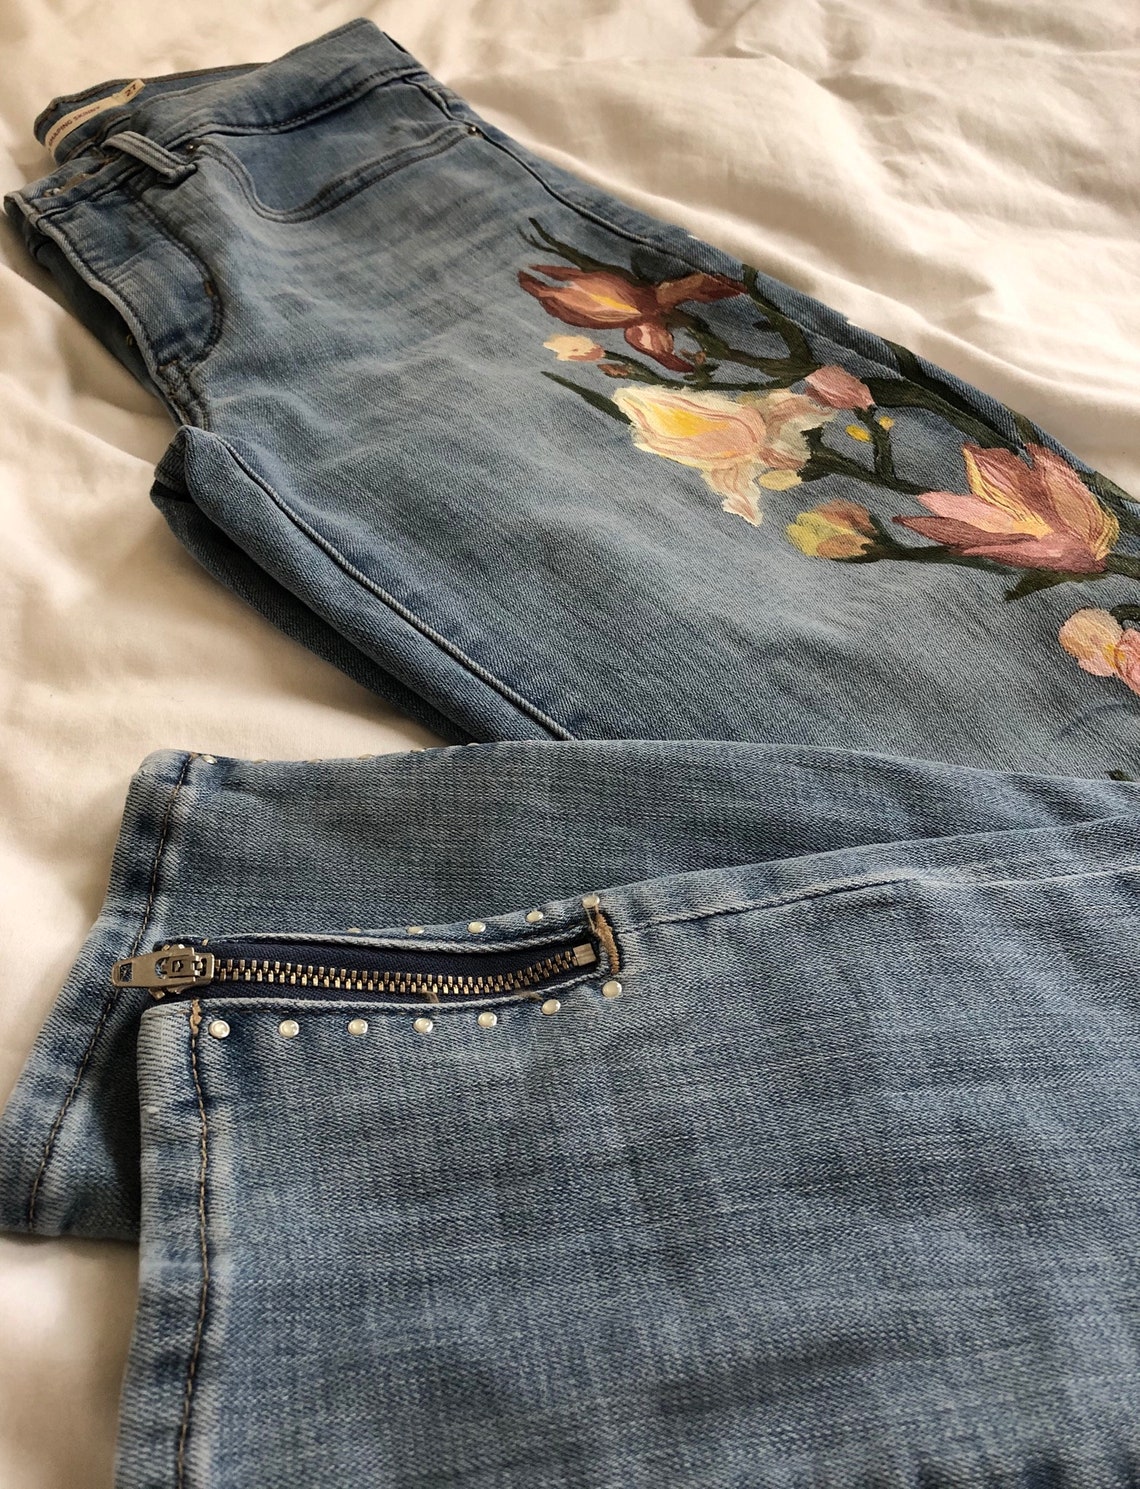 FLORAL HANDPAINTED JEANS Levis 311 Shaping Skinny Ankle | Etsy